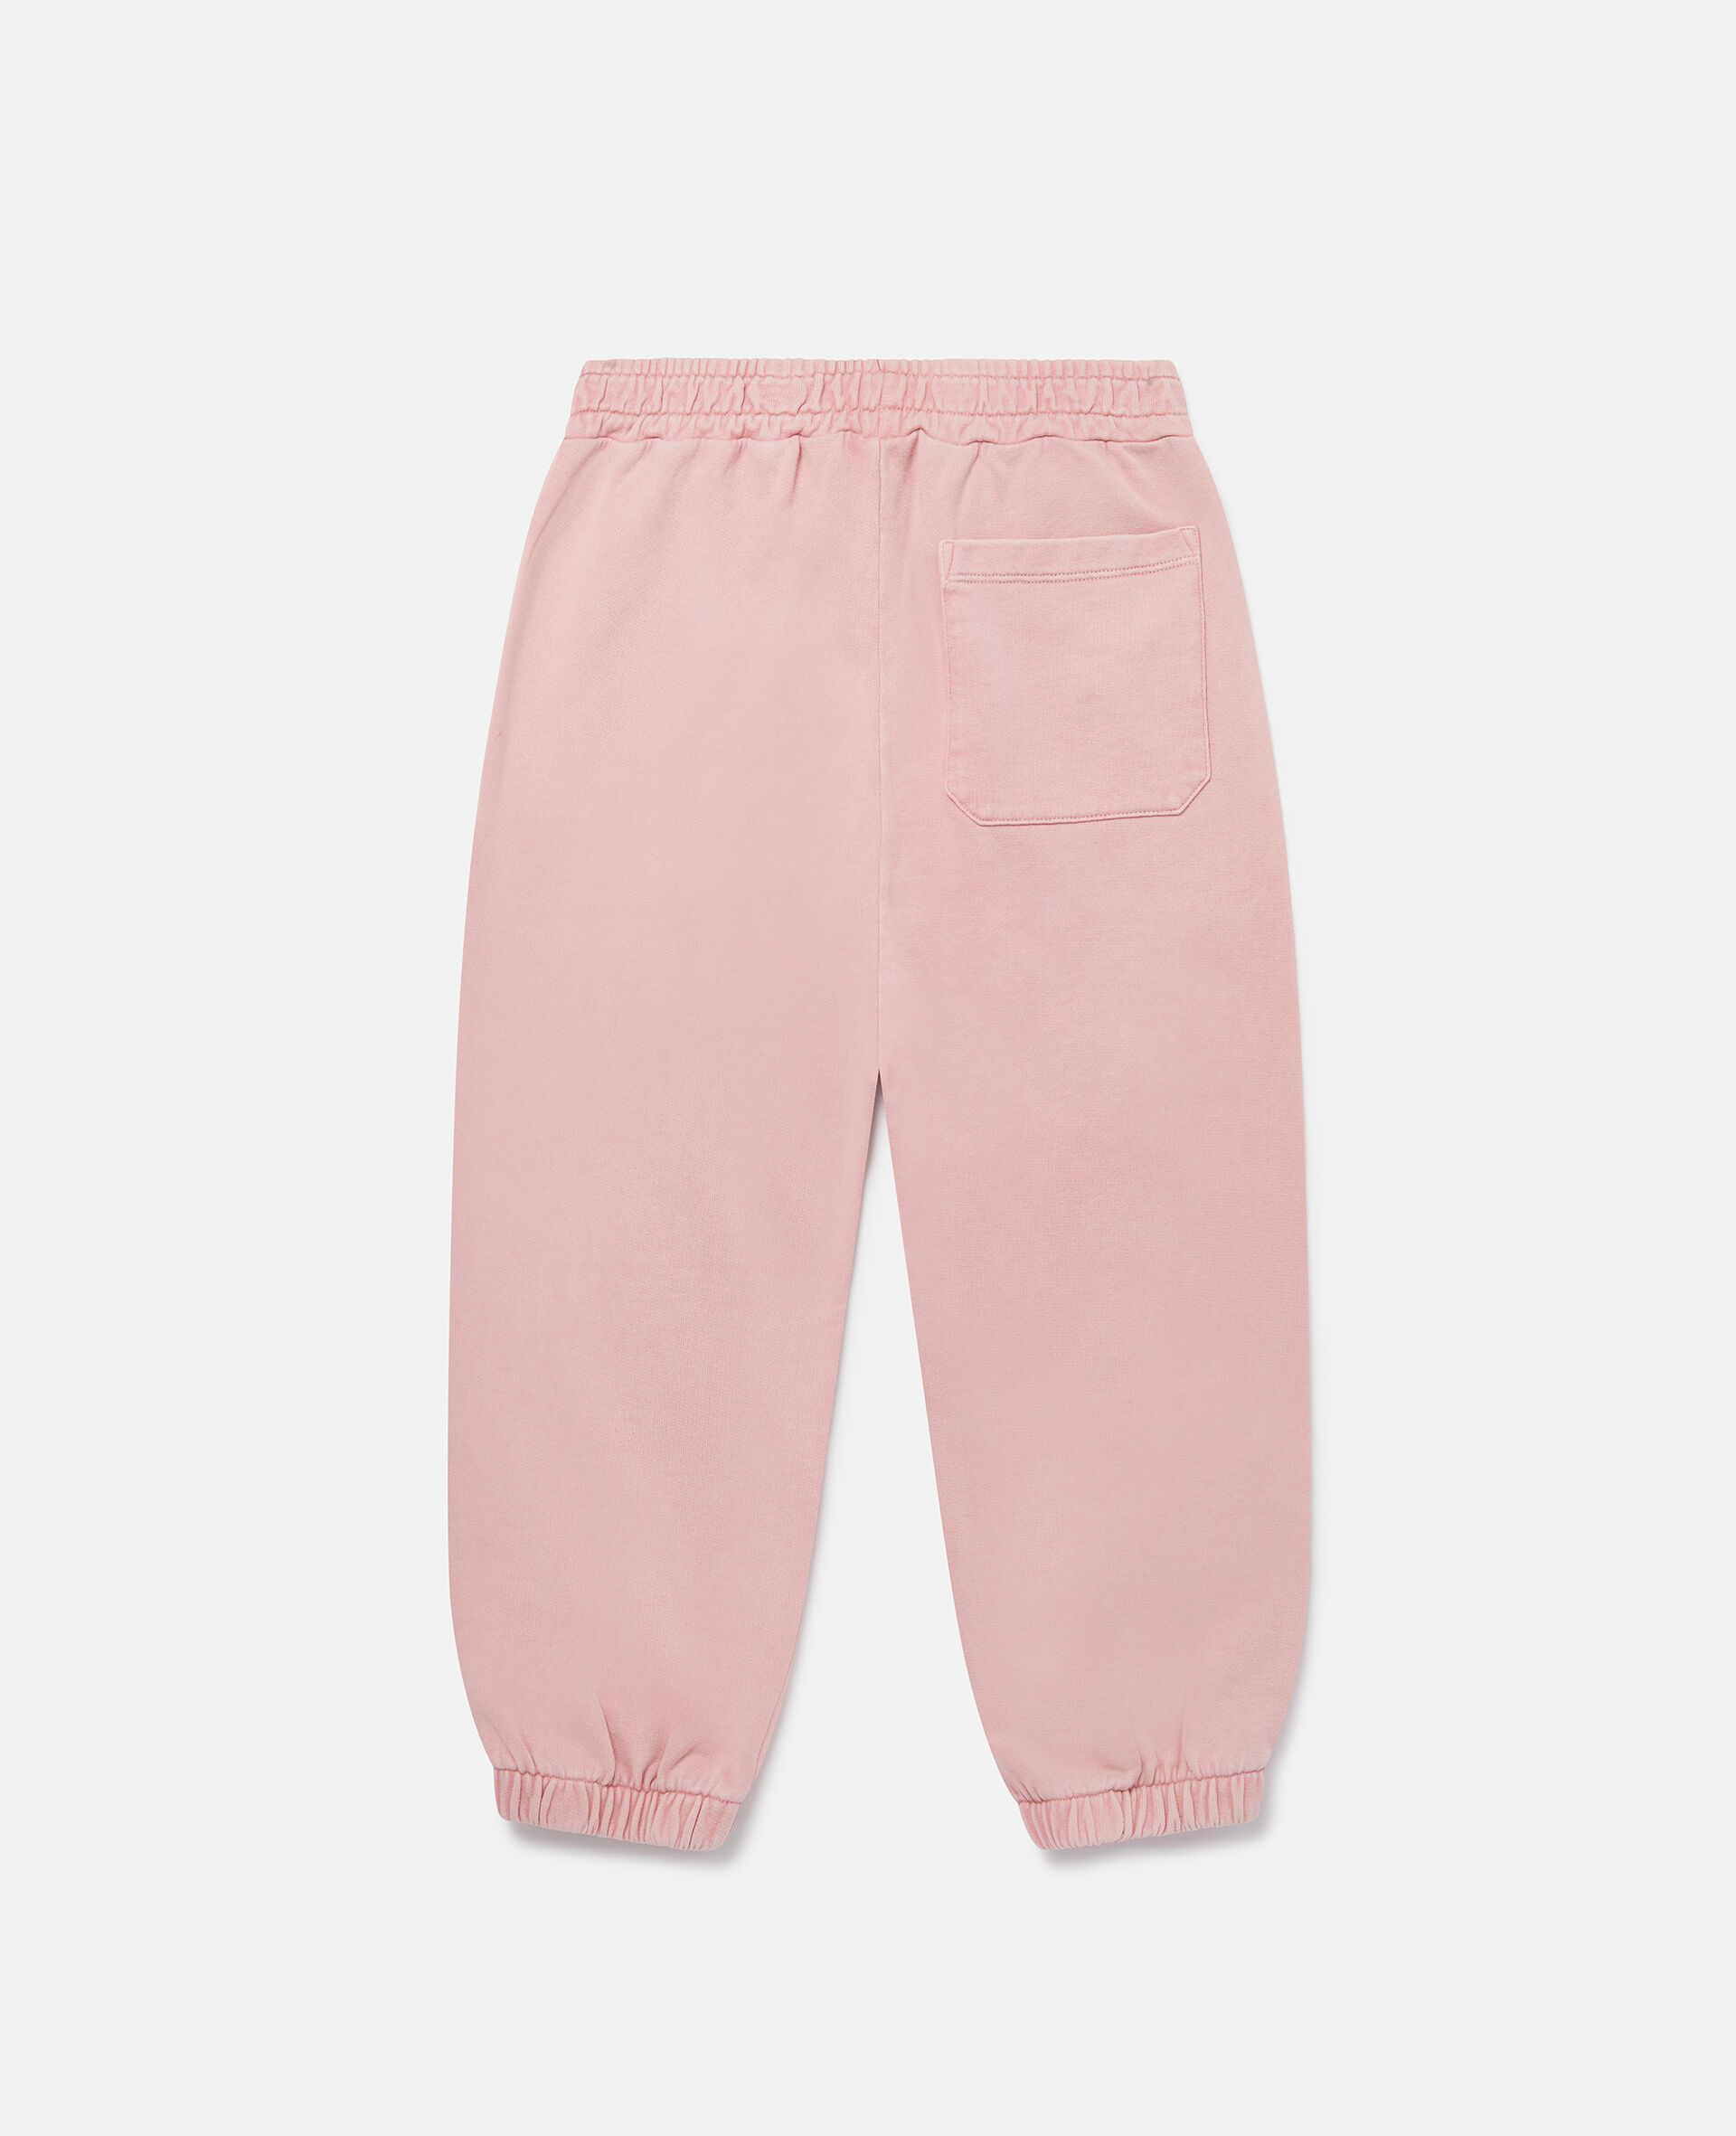 Stella Logo Embroidery Joggers-Pink-large image number 2